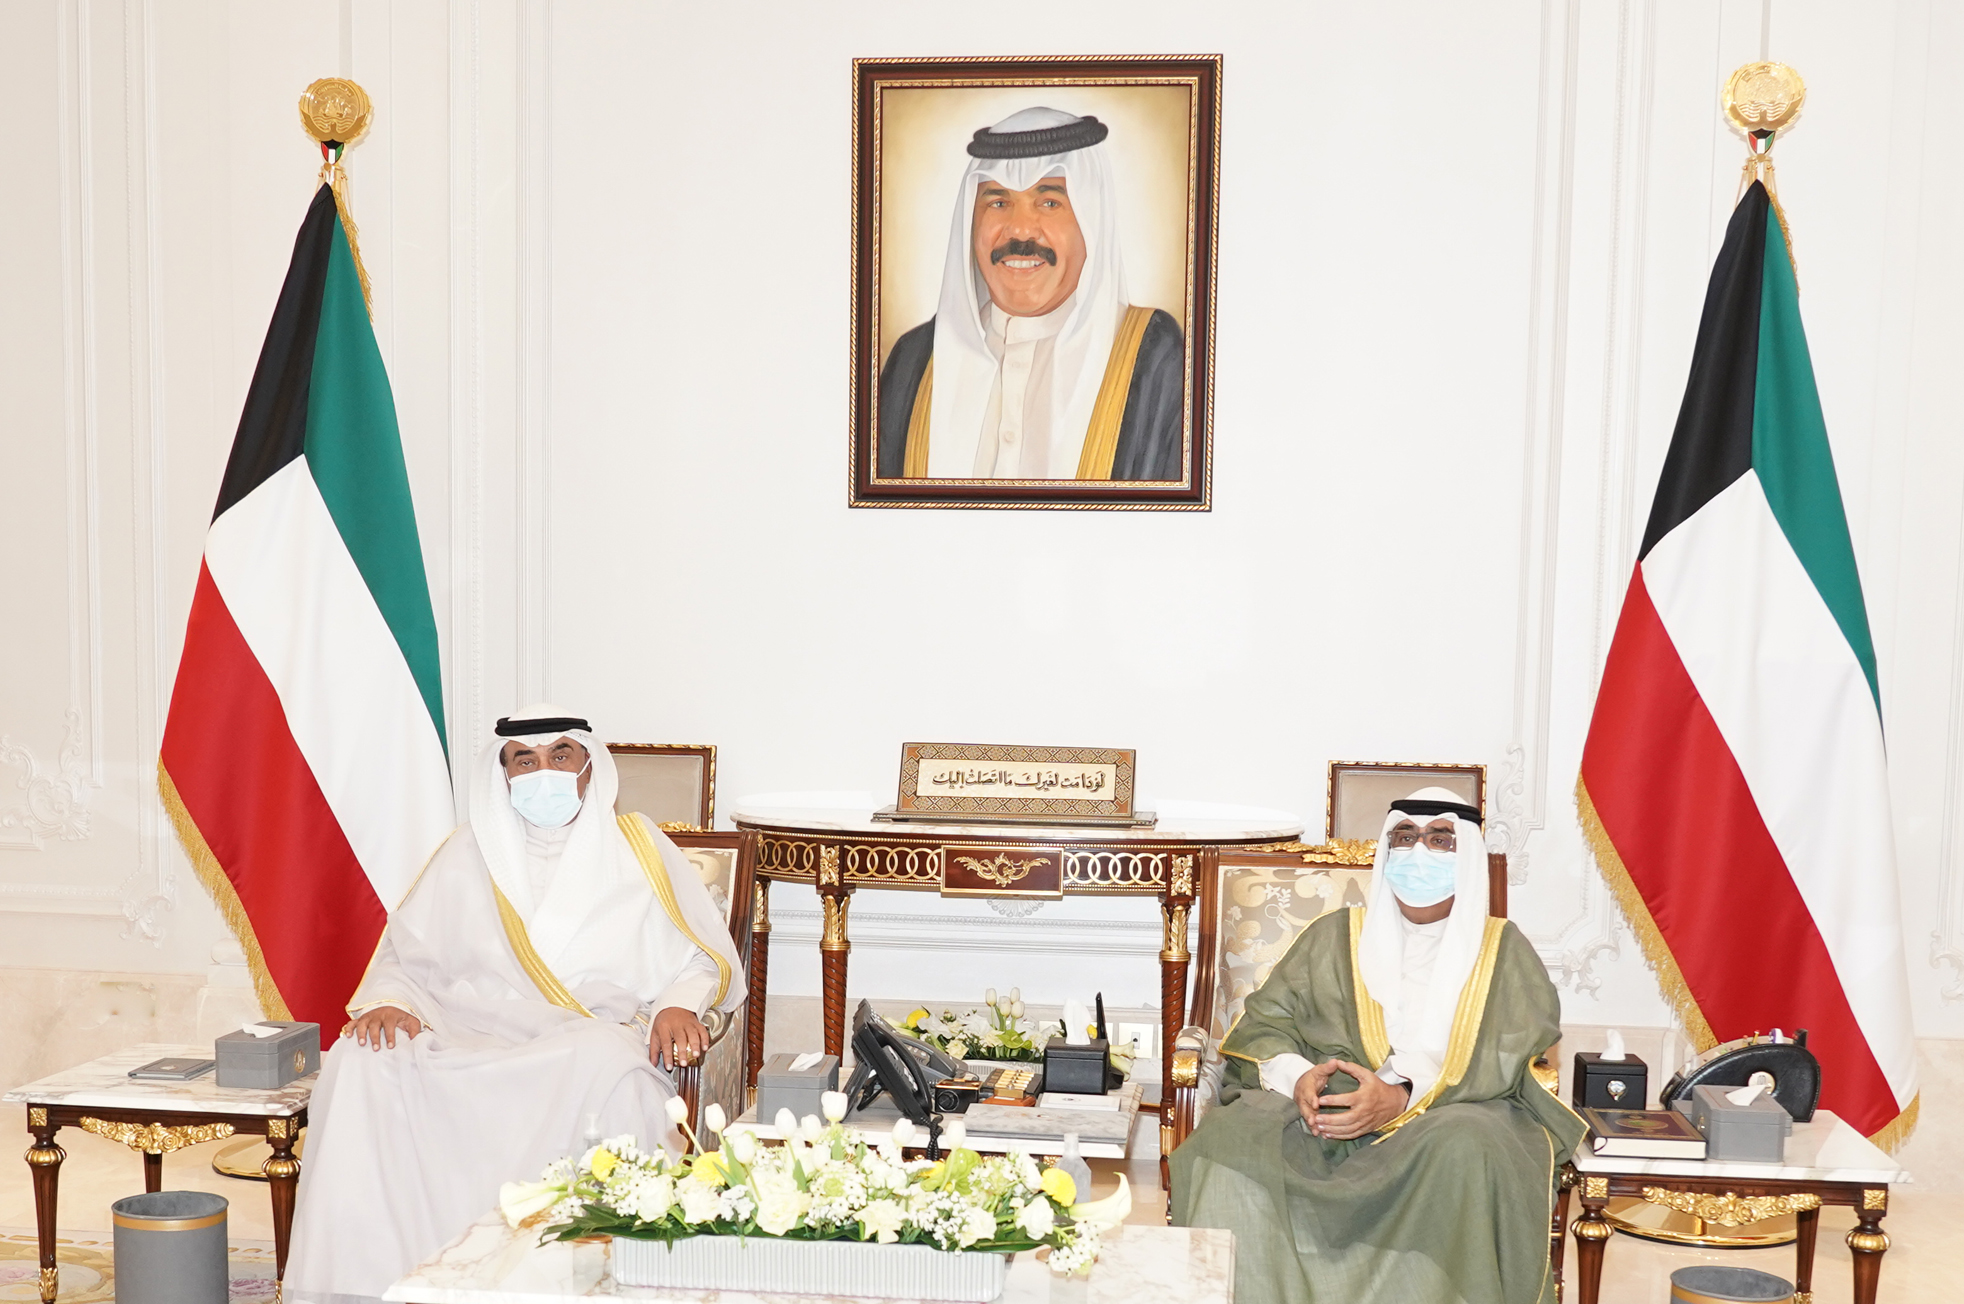 HH the Crown Prince received HH the Prime Minister